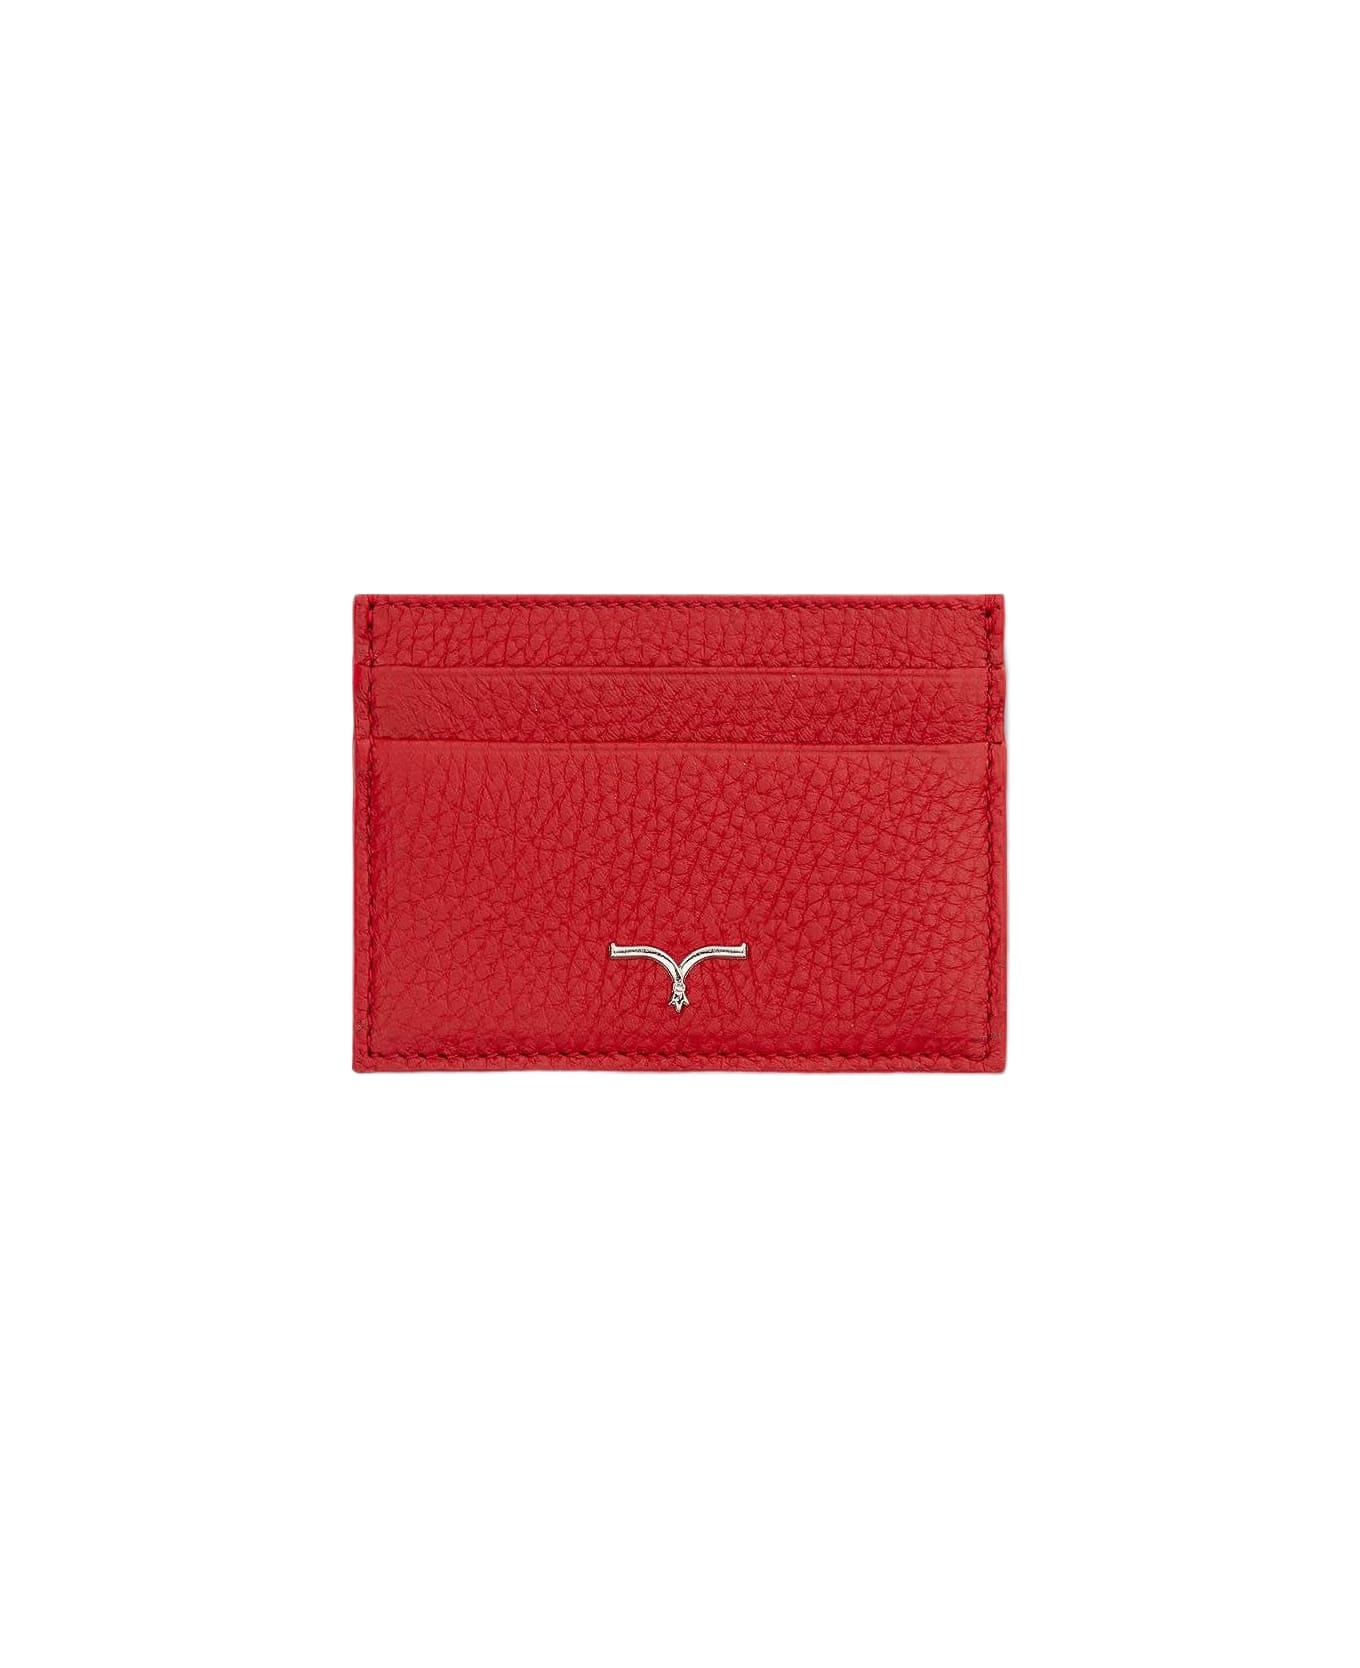 Larusmiani Card Holder 'yield' Wallet - Red 財布